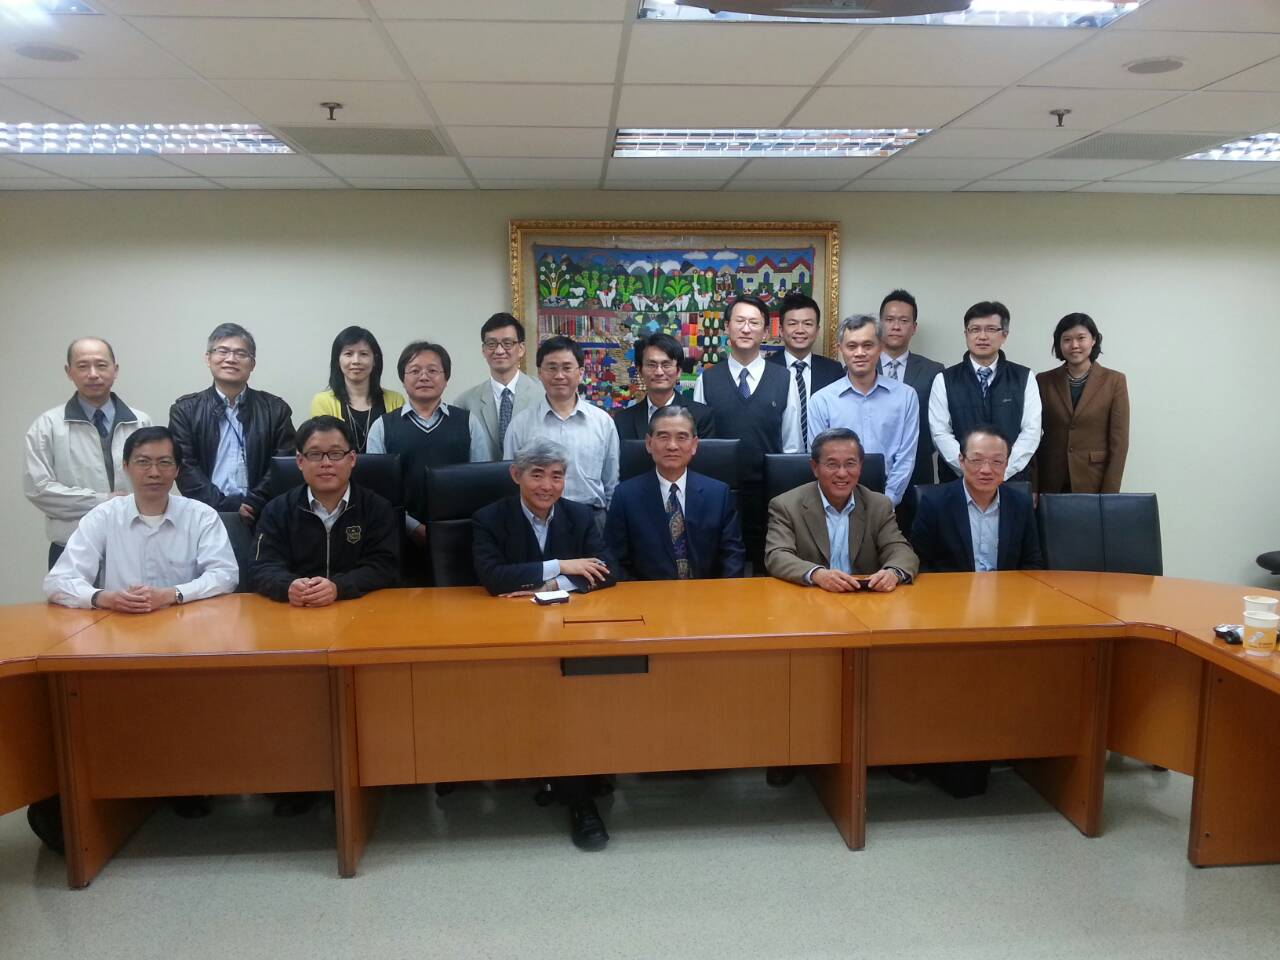 Company representatives take a photo after the exchange meeting. (fourth from left is Paul Chou, TTIA's secretary general; fifth from left is Joe Huang, president of Taiwan's Automotive Research & Testing Center).


